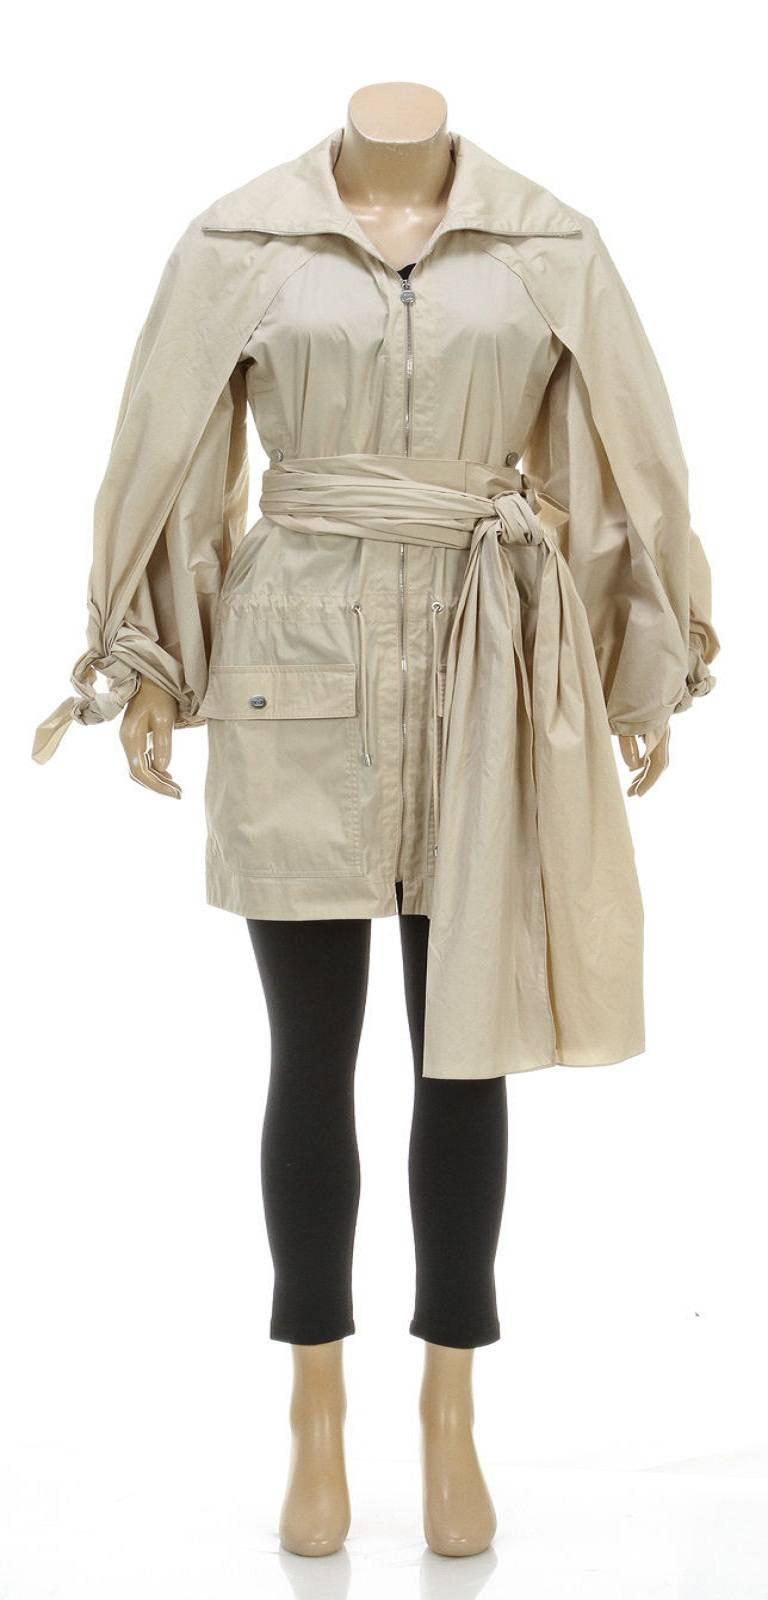 Keep it covered in this fantastic coat from Chanel! This beige jacket contains a construction of cotton and nylon as it falls in a long hemline, zipping up the front. Four pockets snap closed in the front while a drawstring lies inside the waist for